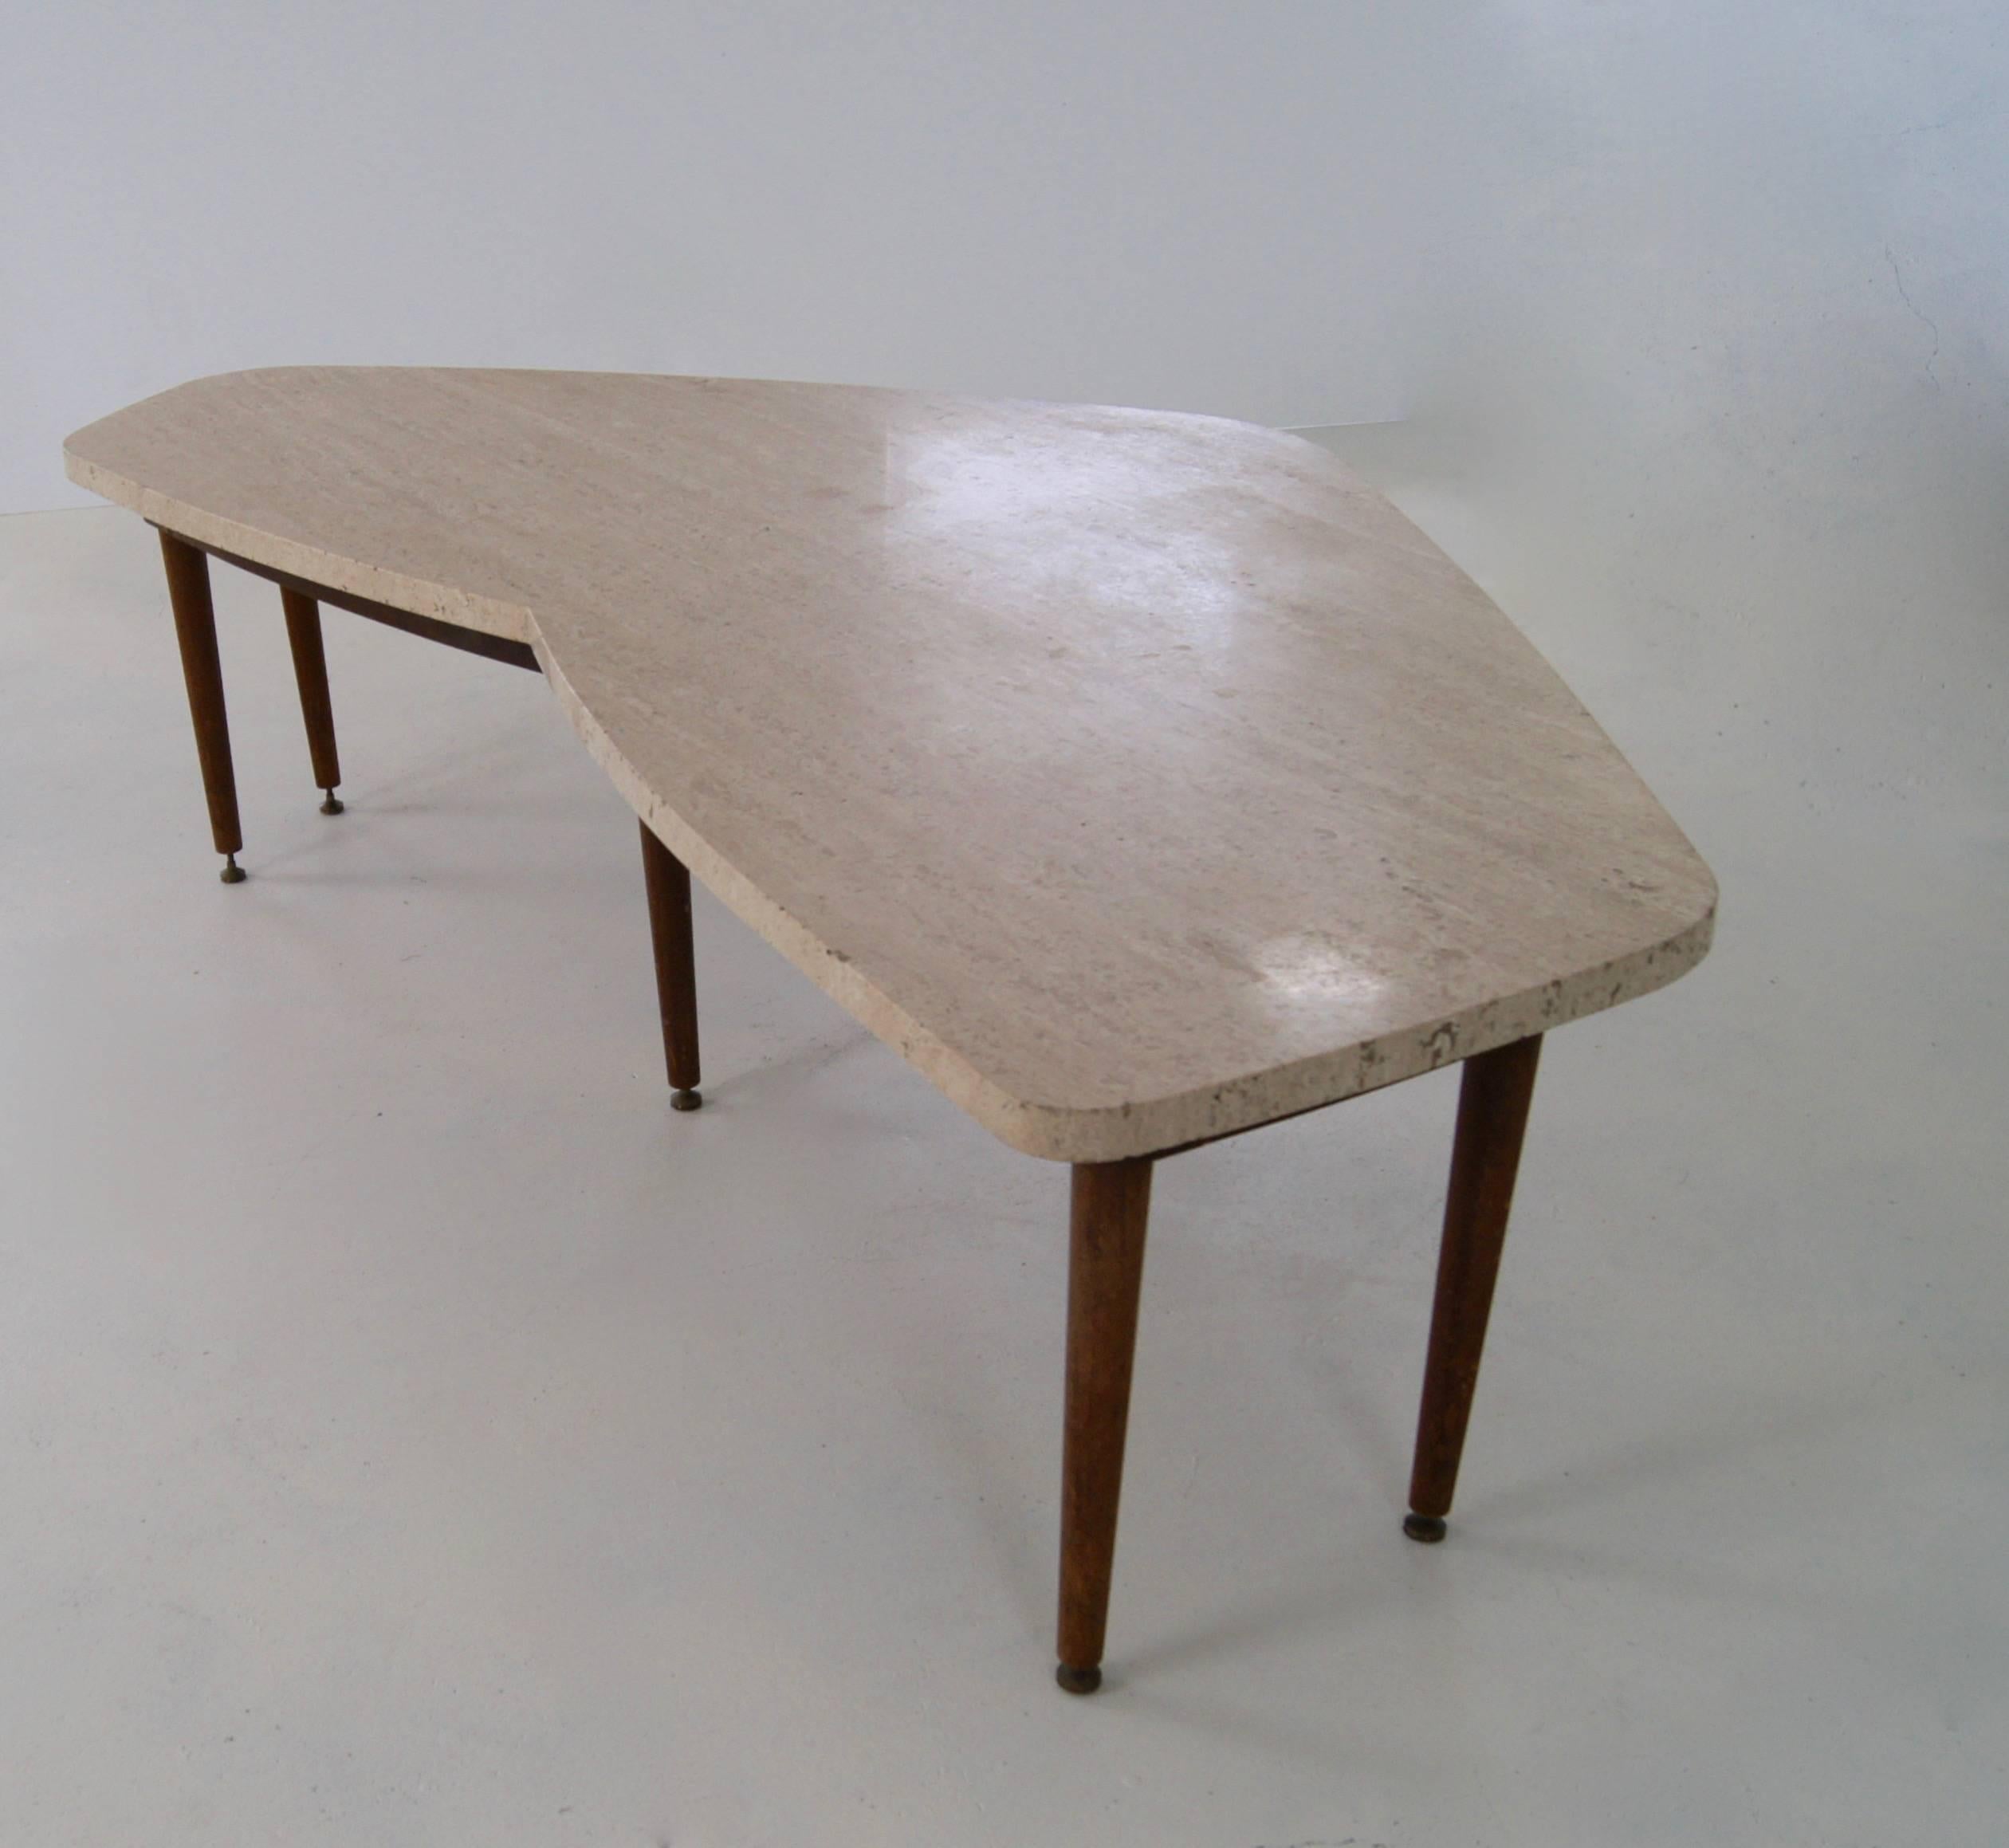 20th Century Mid-Century Free Form Low Table with Travertine Top, Italy